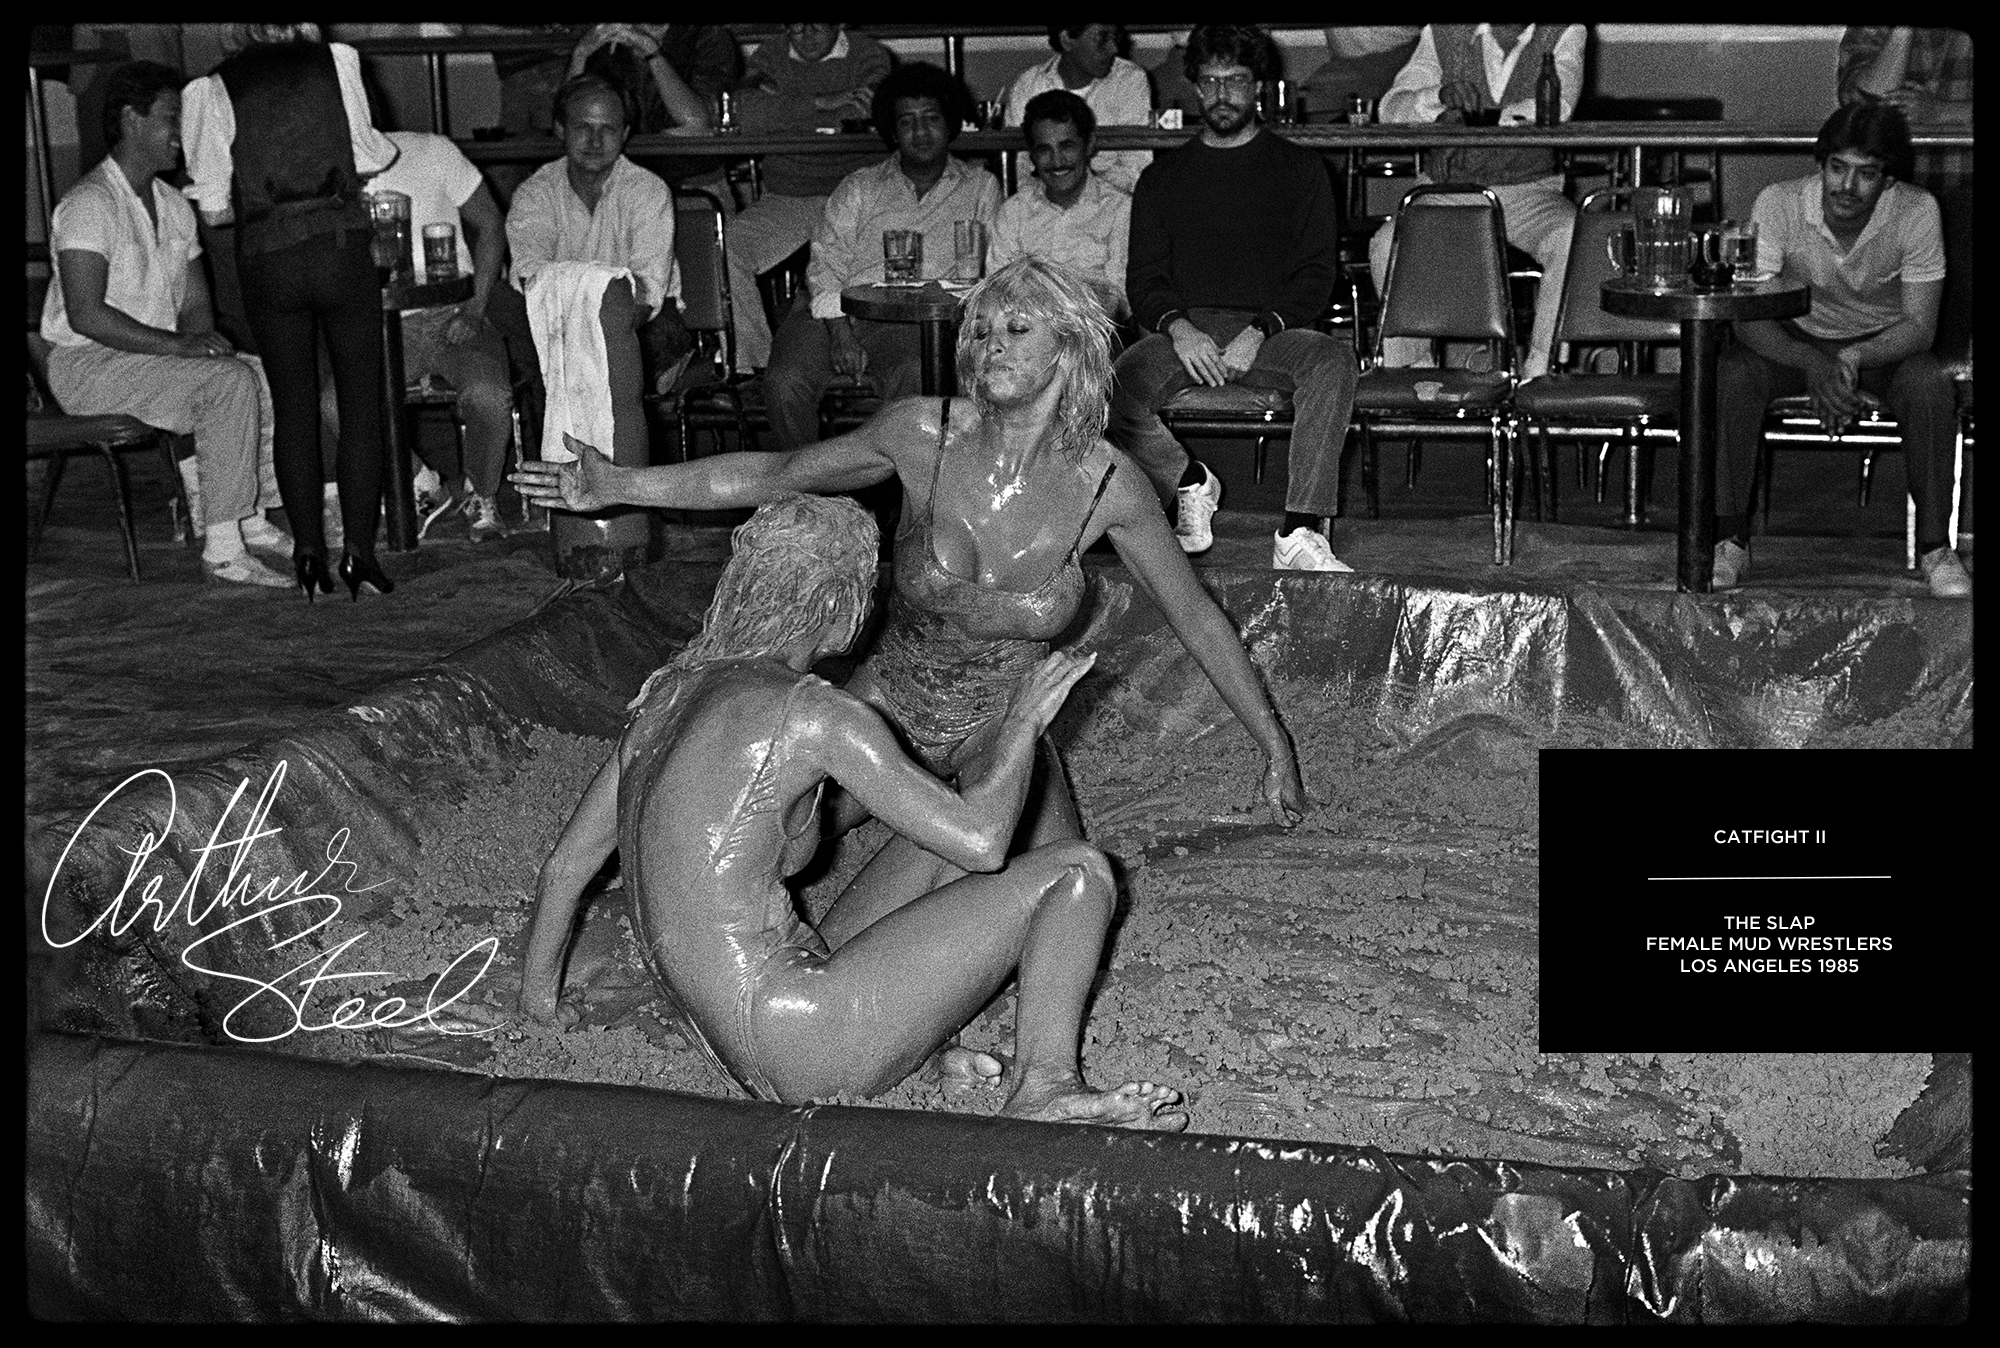 rare_black_and_white_photograph_catfight_female_fighting_mud_wrestlers_los_angelesby_arthur_steel